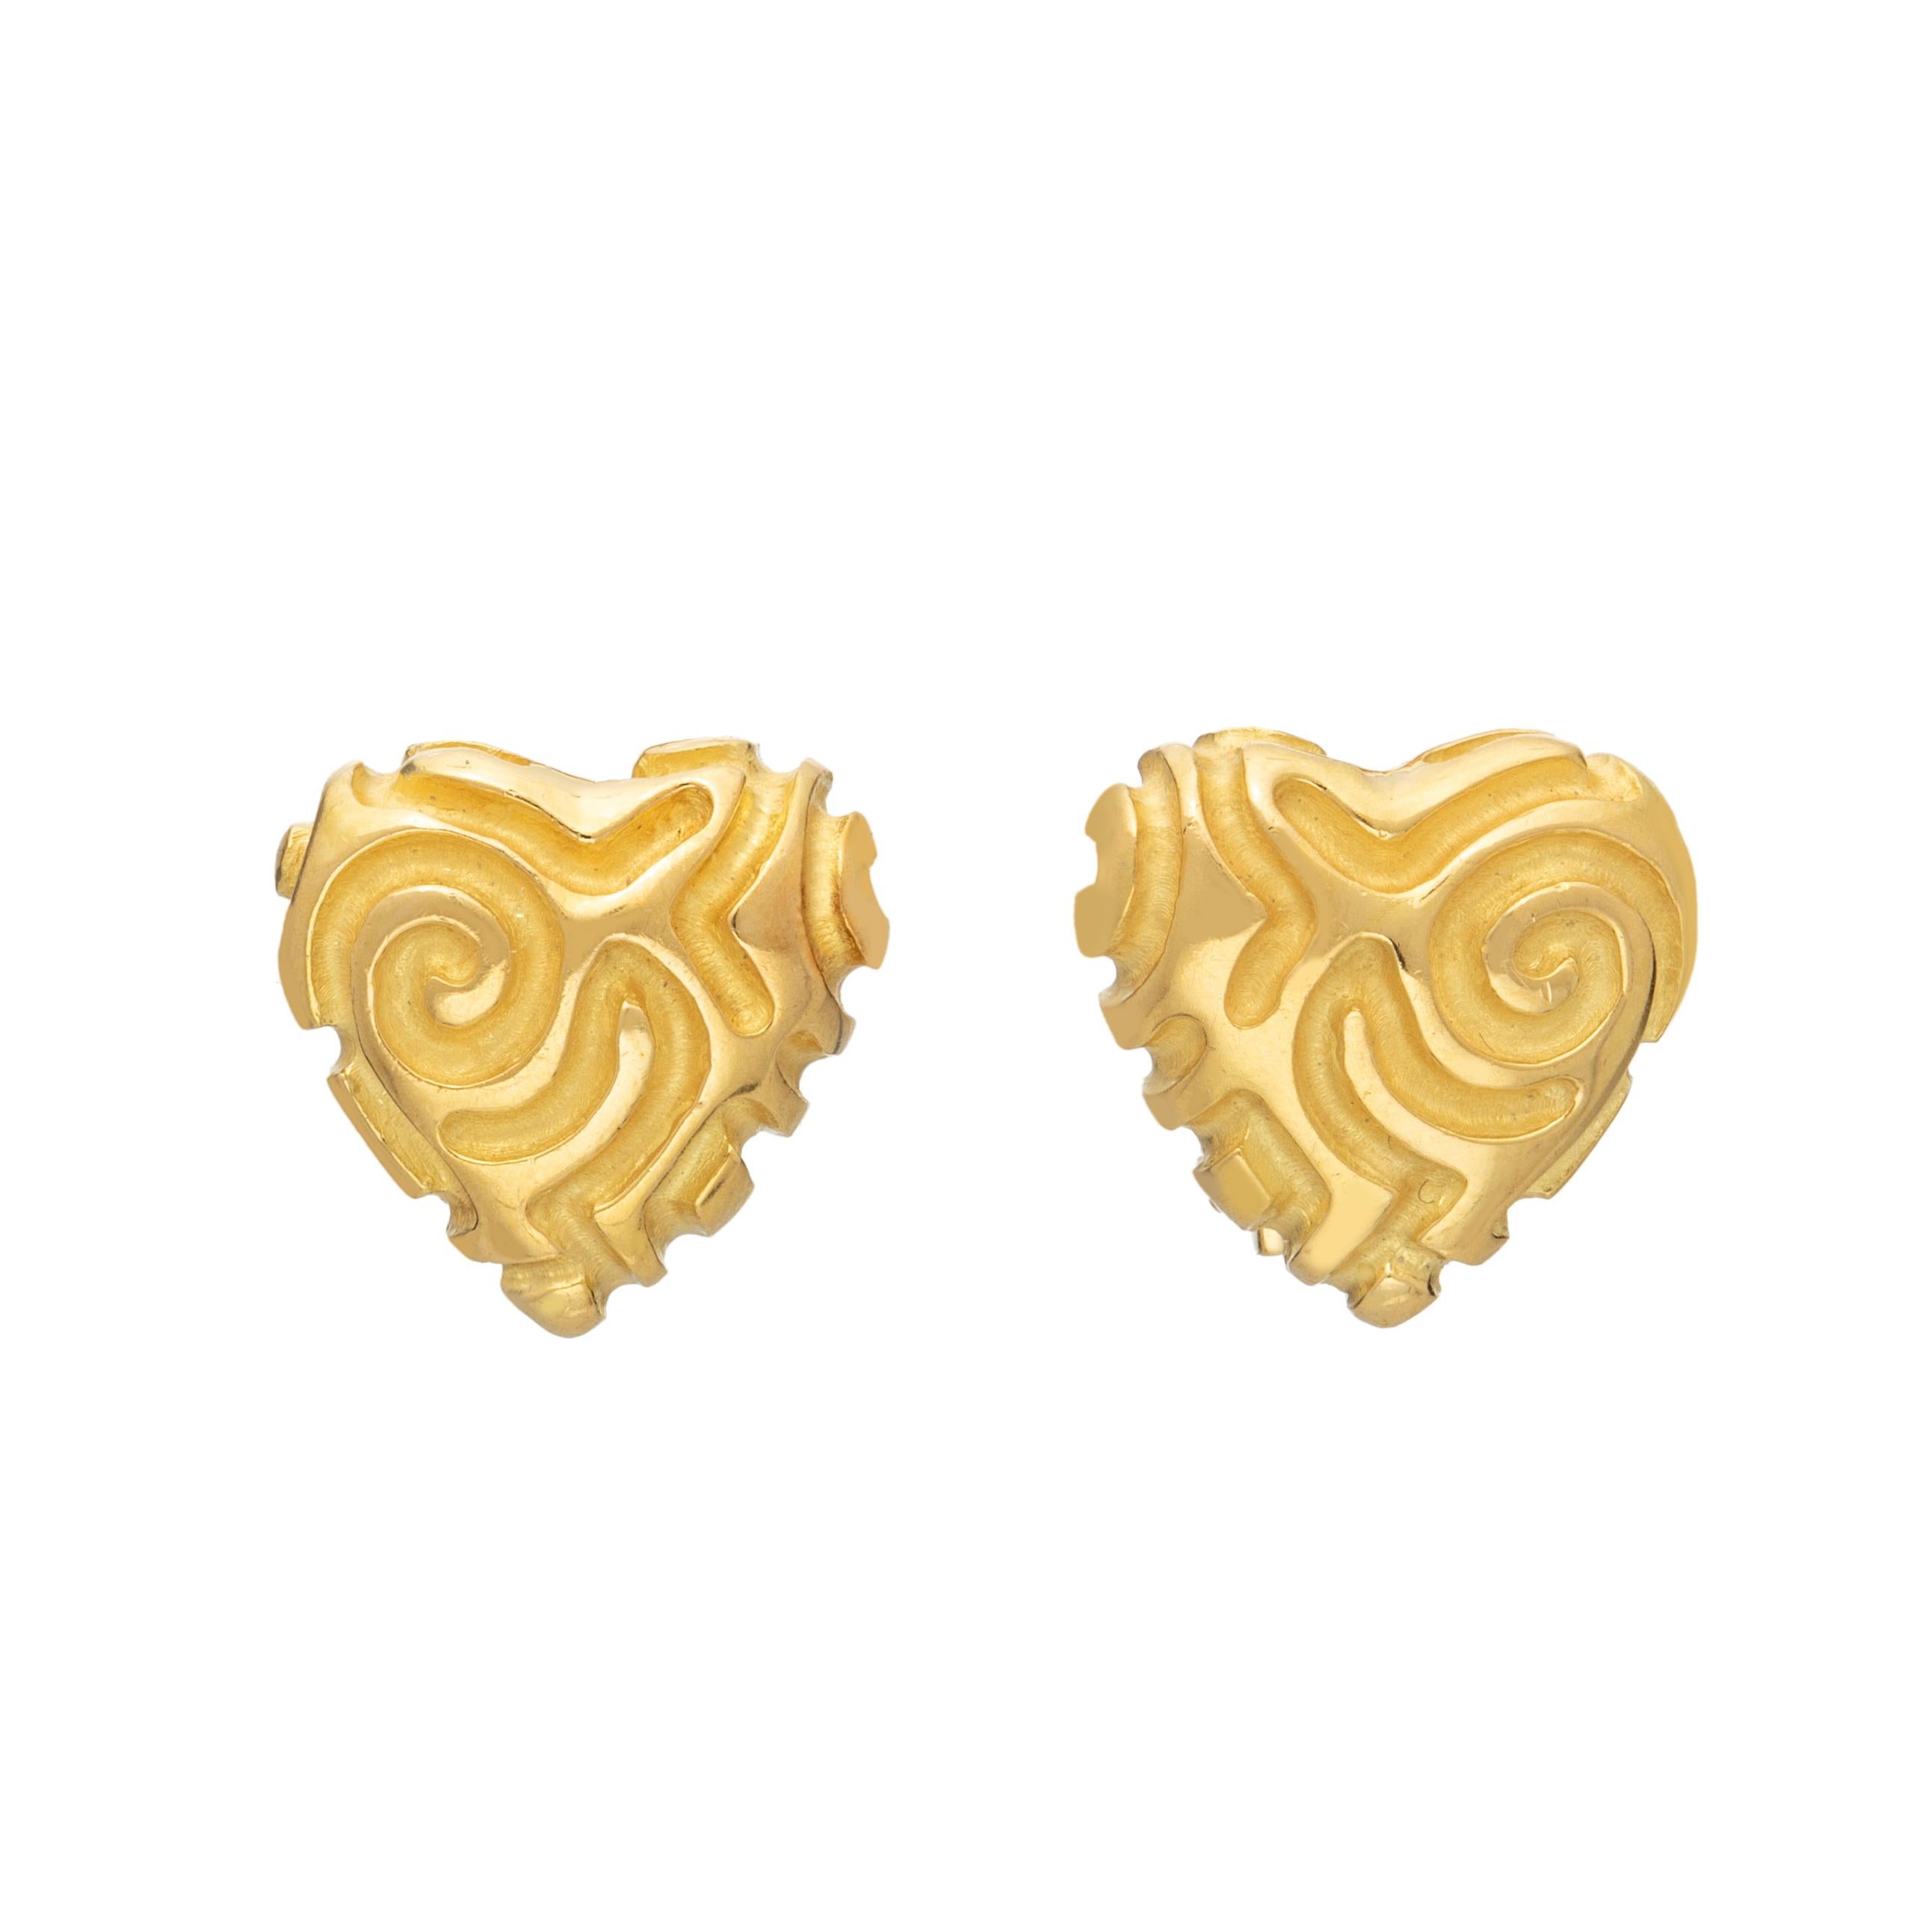 Carved Heart Earrings in 18k Gold, by Gloria Bass Design In New Condition For Sale In Westmount, CA